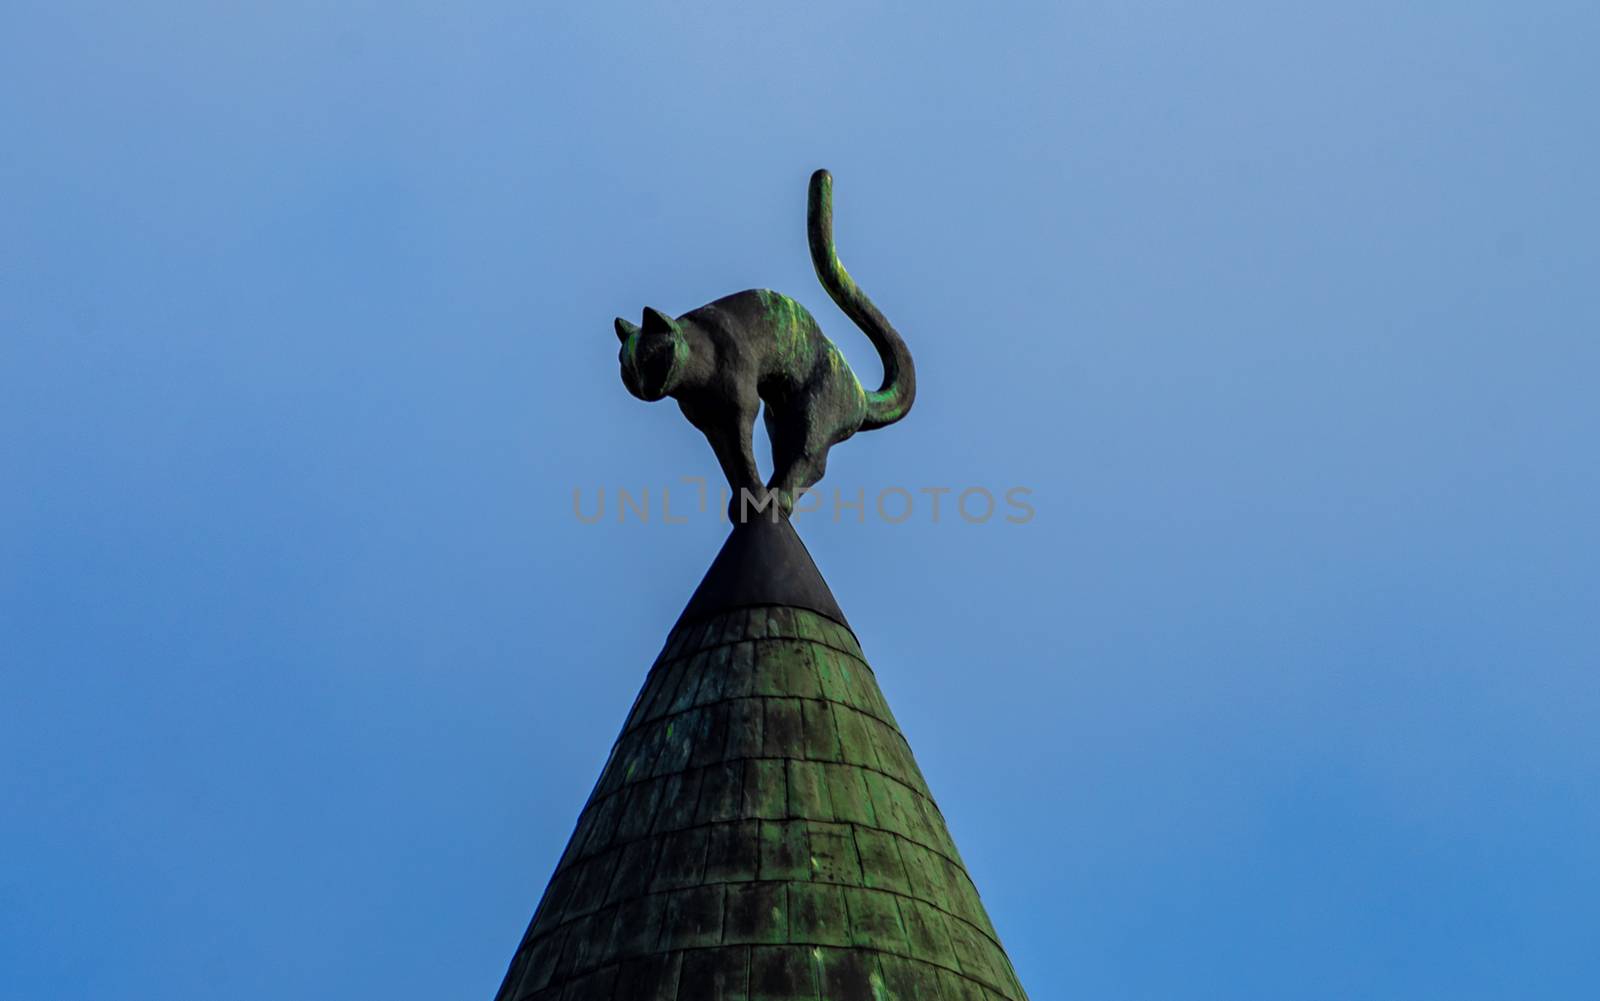 April 26, 2018 Riga, Lativia. Cat statue on the roof of an apartment building in Straom city in Riga.